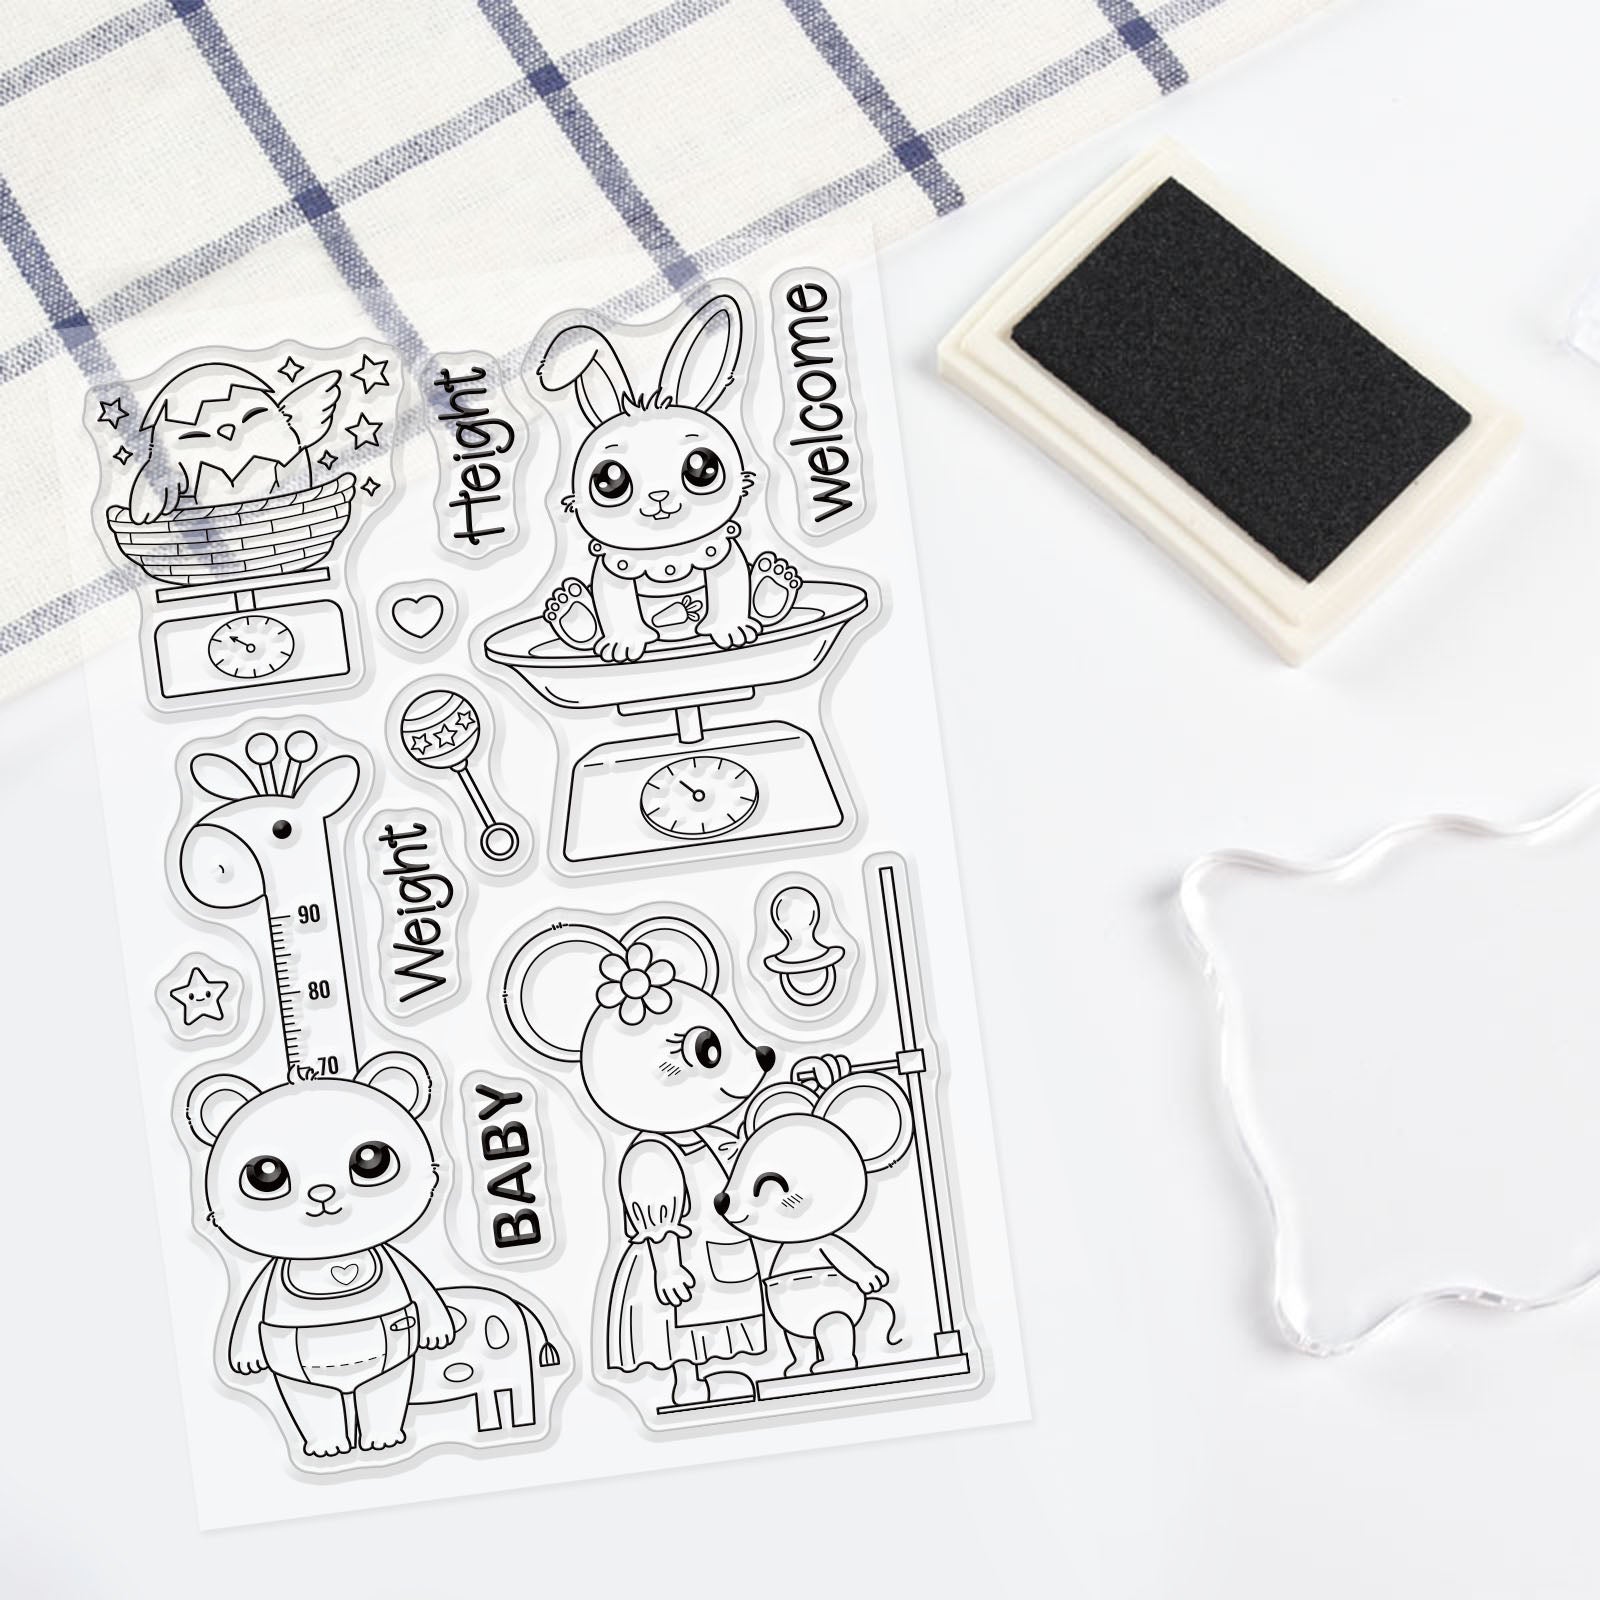 Globleland Animal, Baby, Weighing, Rabbit, Bear, Rat, Chicken Clear Silicone Stamp Seal for Card Making Decoration and DIY Scrapbooking